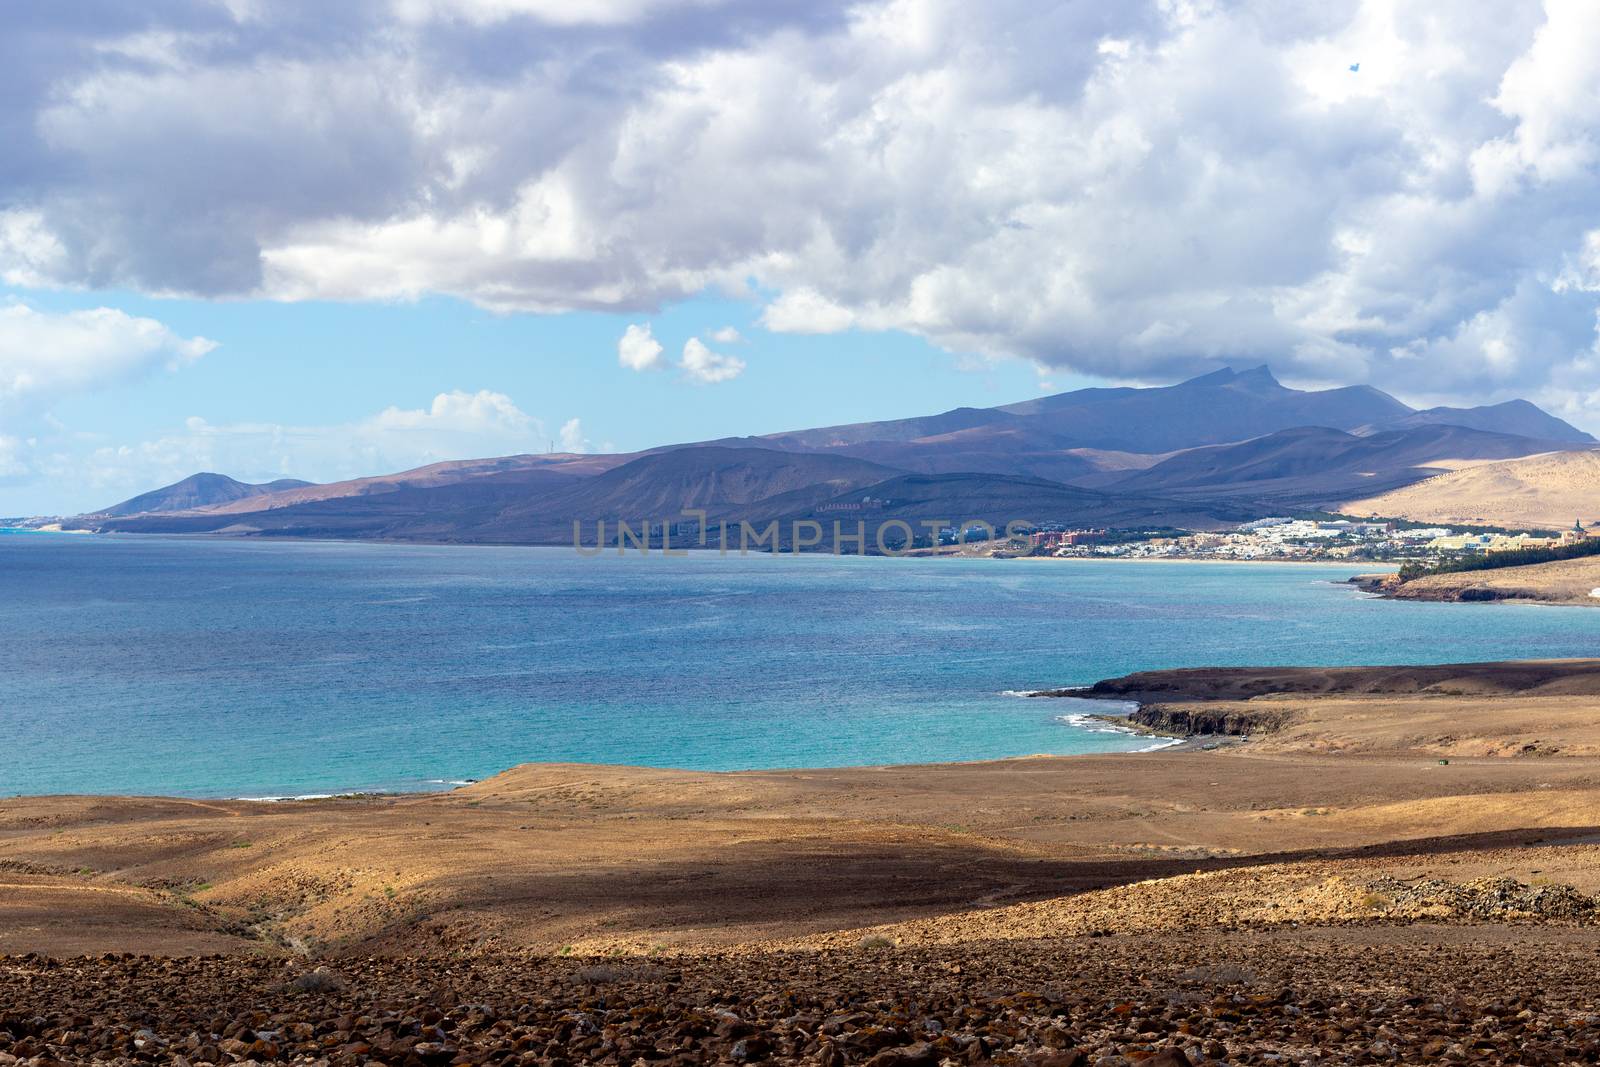 Panoramic view peninsula Jandia on canary island Fuerteventura, Spain with coastline and mountain range in the background